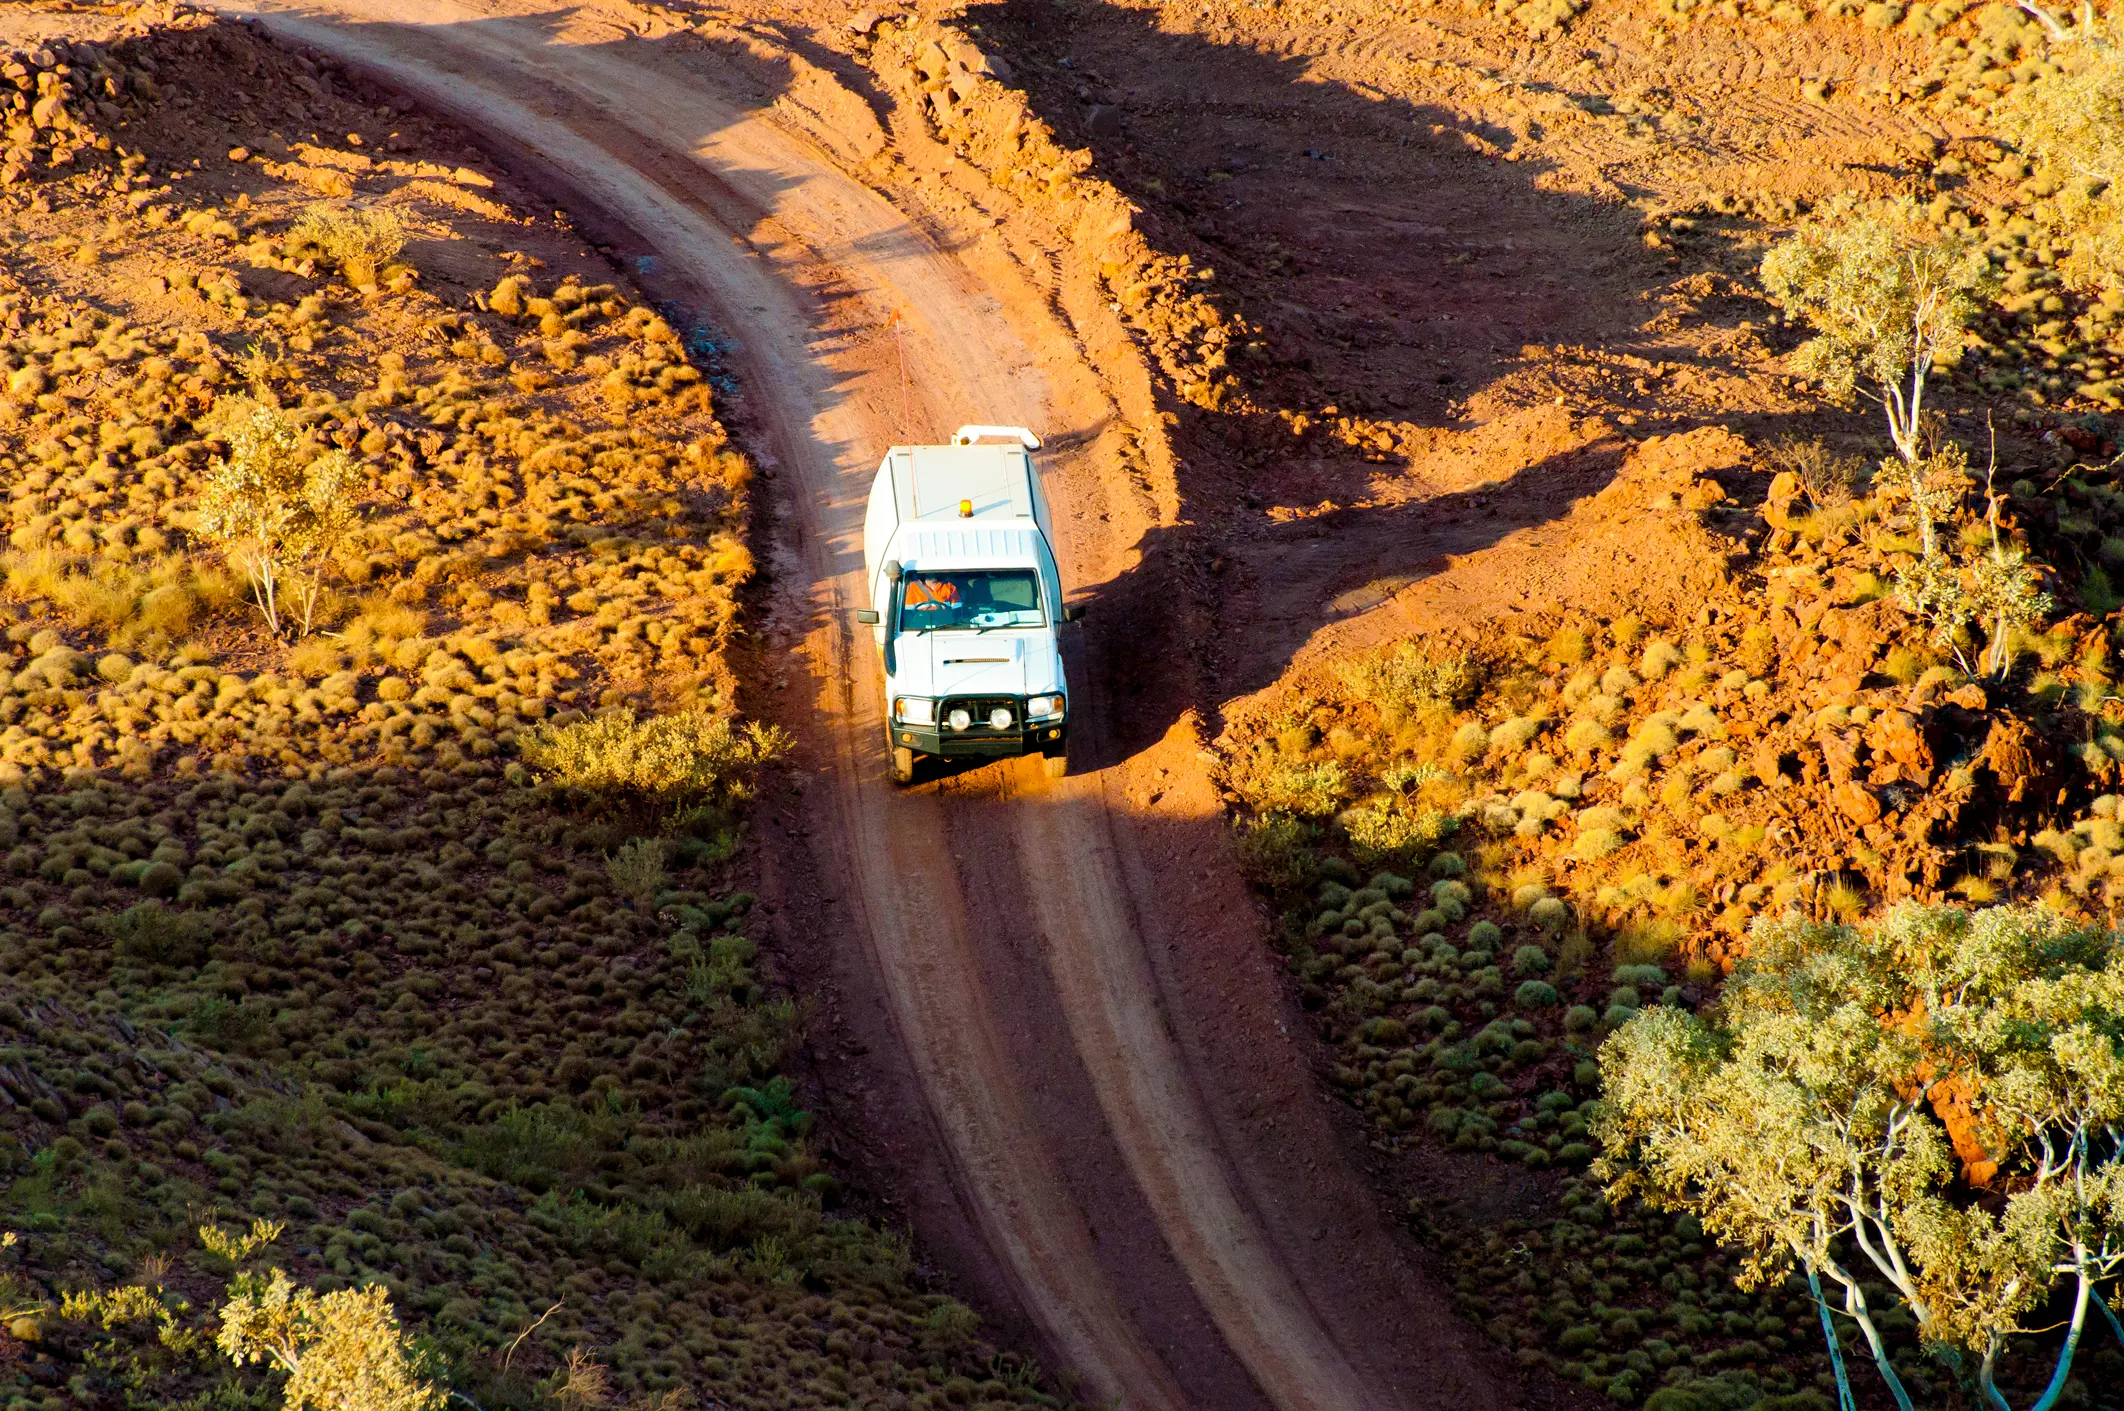 Light vehicle travelling on a dirt road through remote North-West Australia